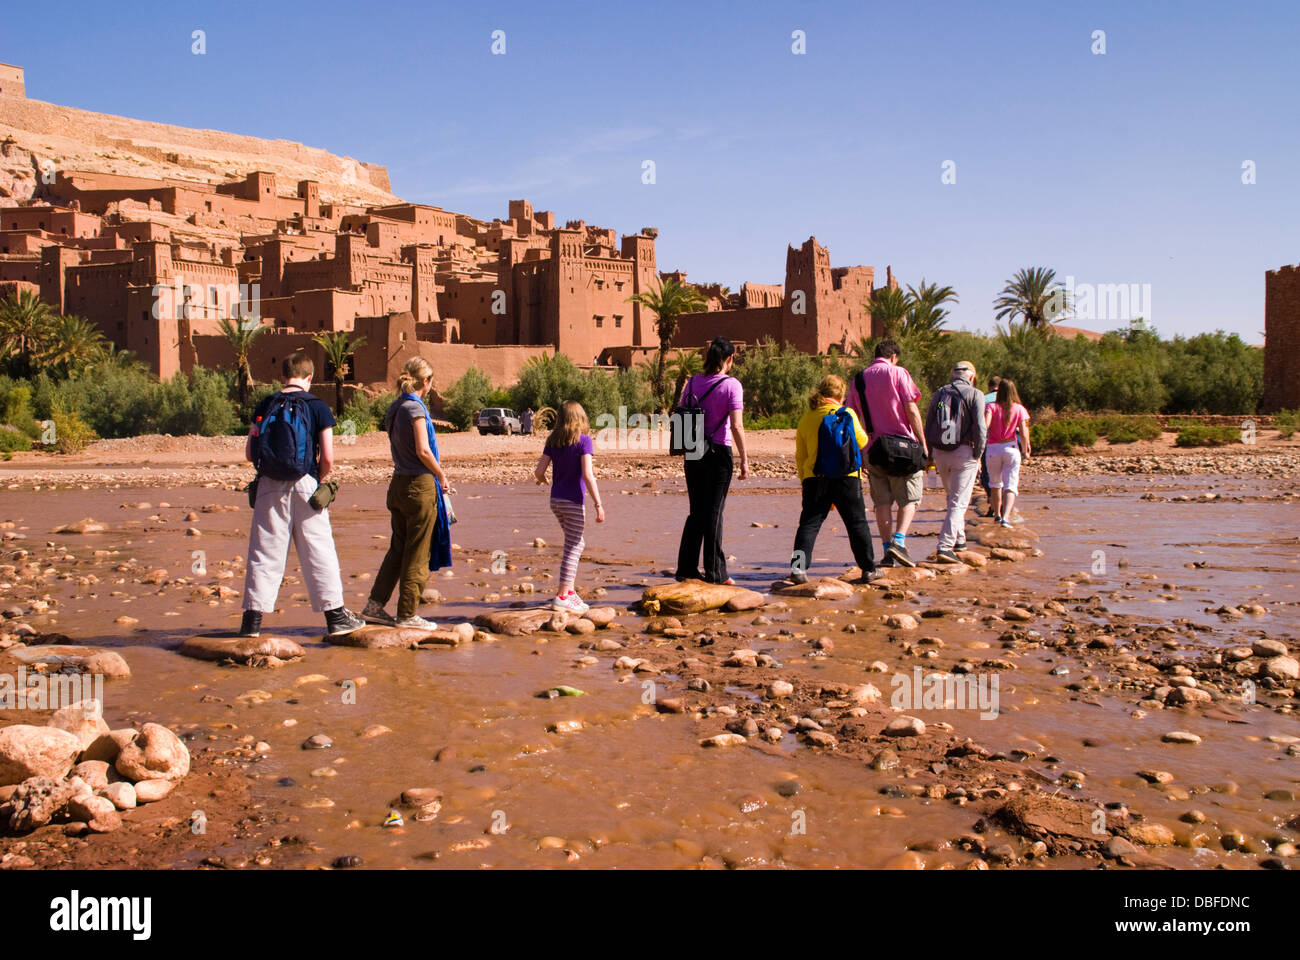 Aït Benhaddou in Berber Ath Benhadu Morocco. Tourists cross the Ounila River . Most of the town's inhabitants now live in a more modern village at the other side of the river; however, eight families still live within the ksar. Stock Photo